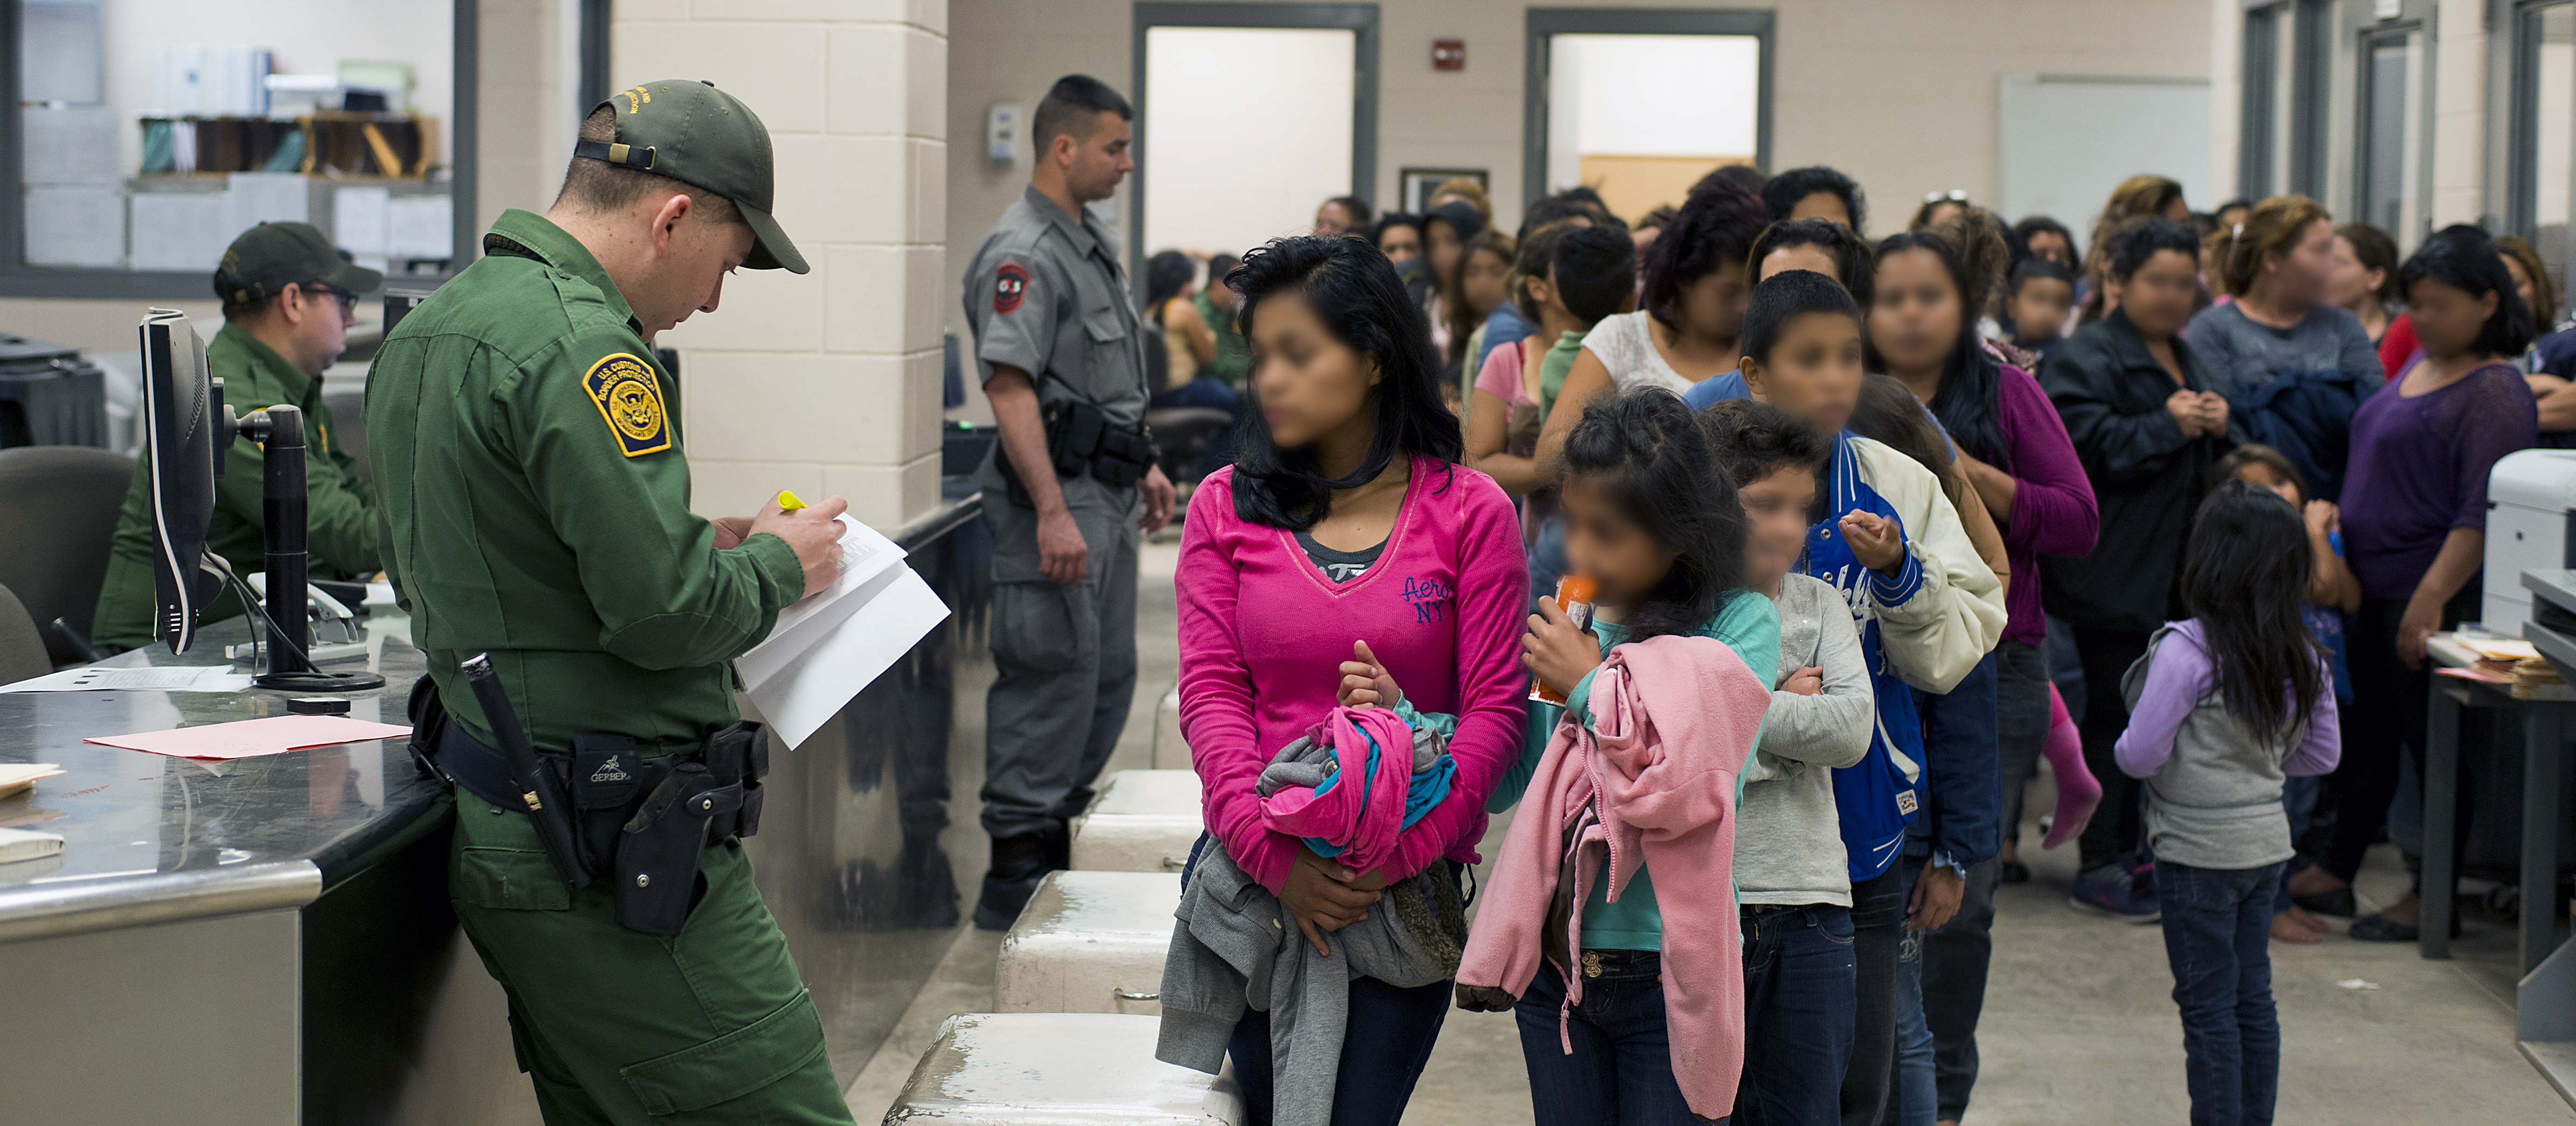 Biden administration to allow migrant children to reunite with parents legally in US